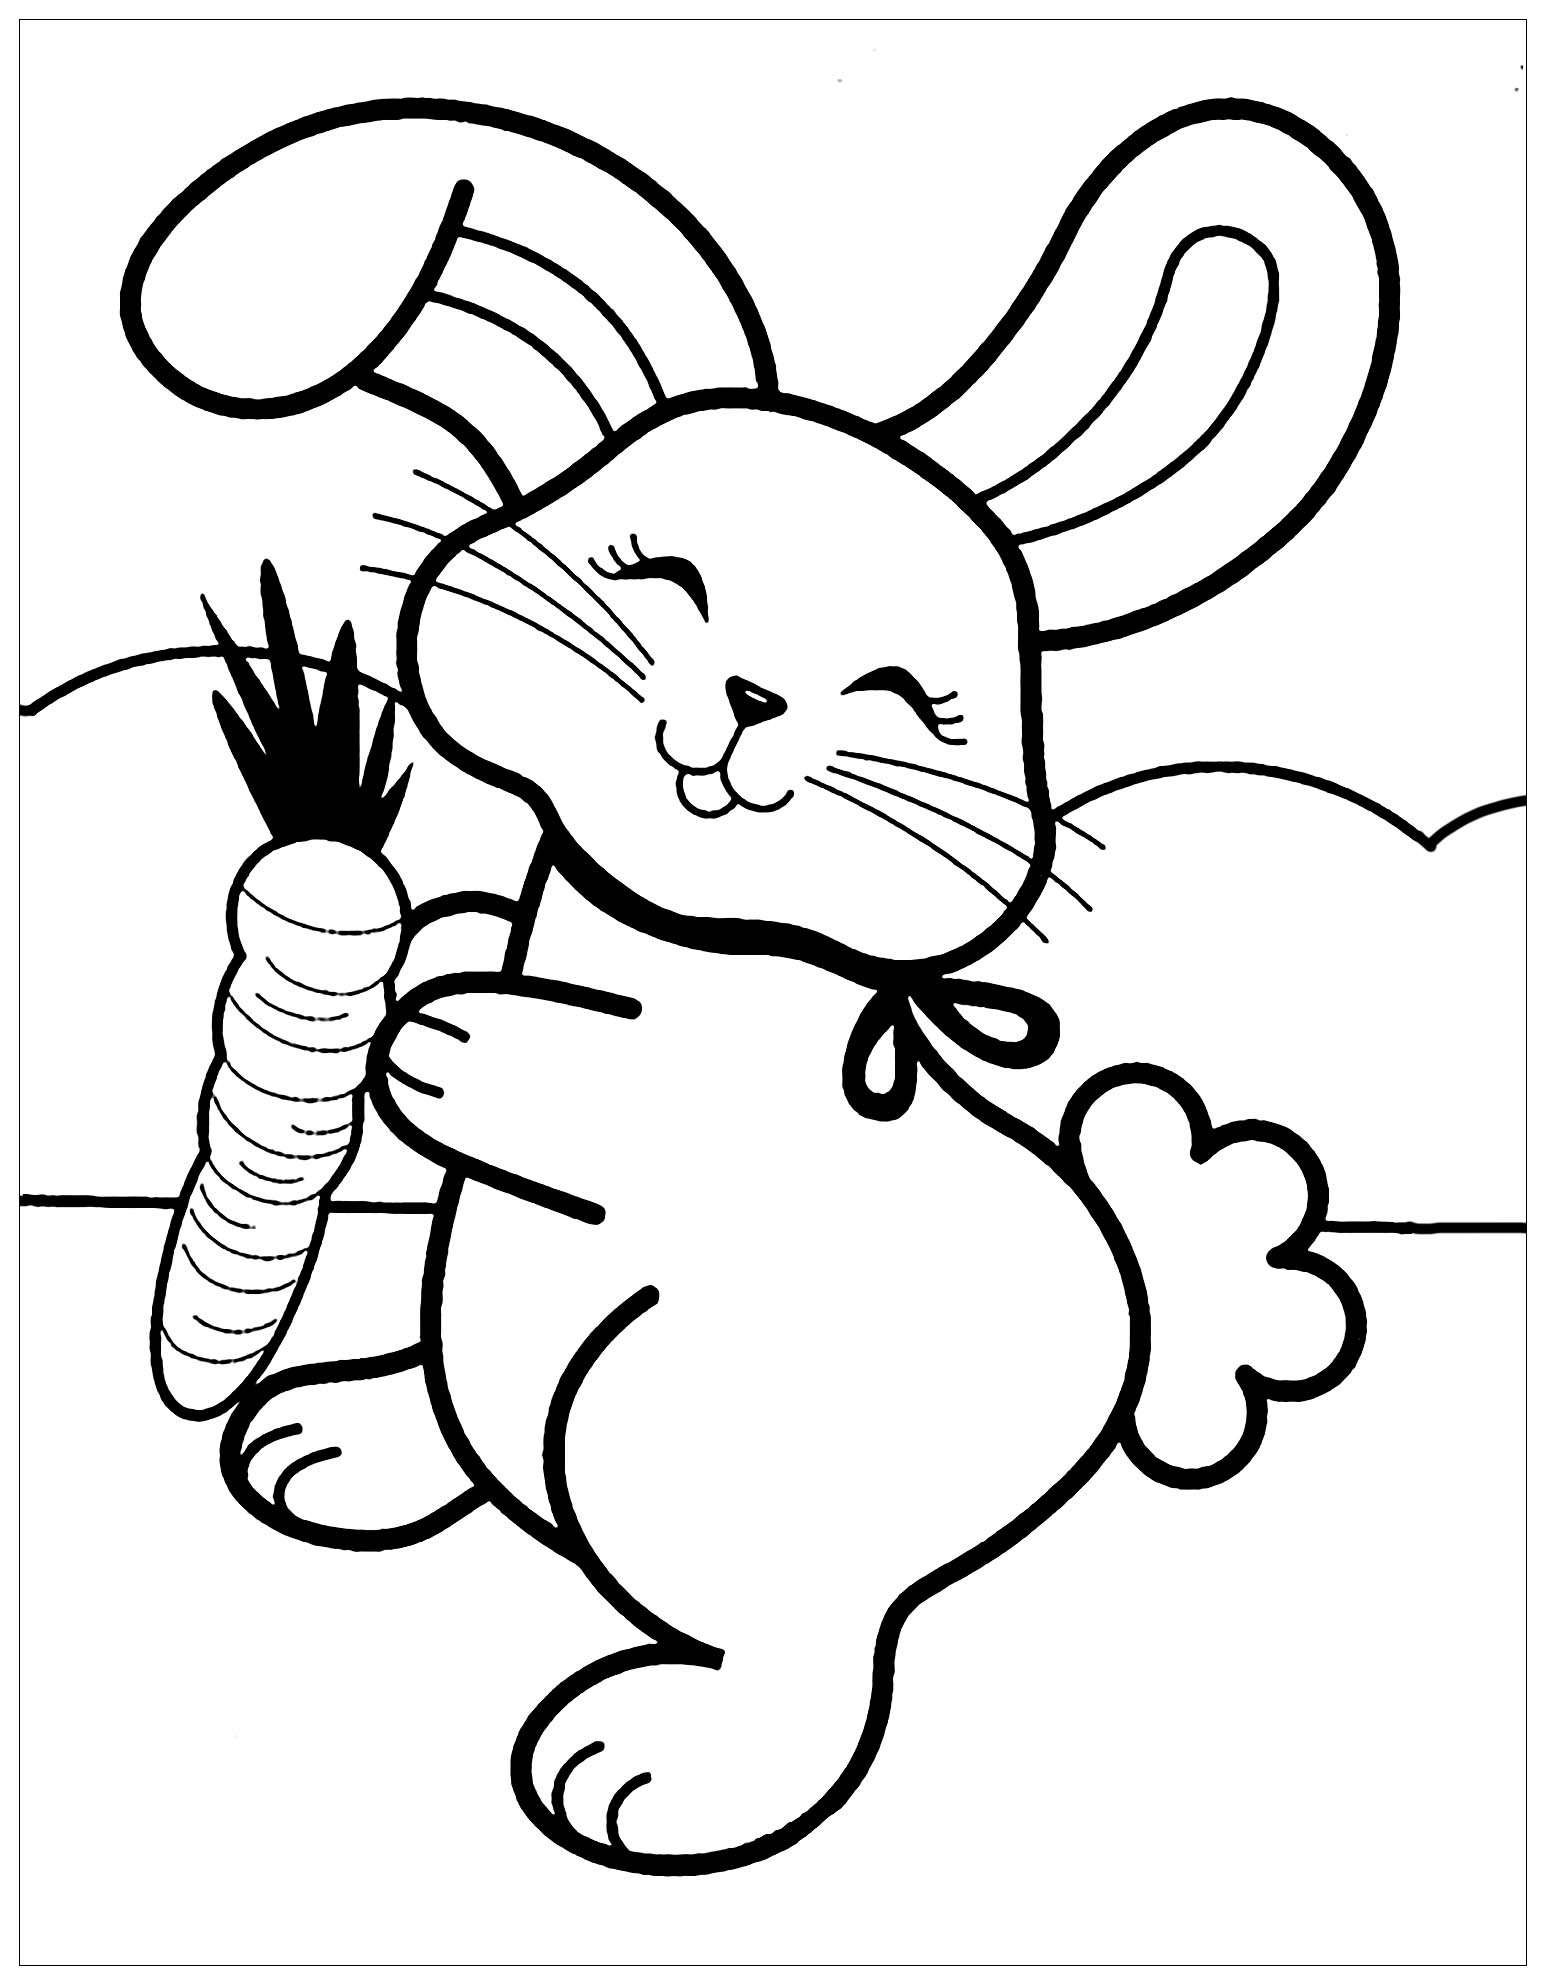 400 Coloring Pages For Bunnies  Free